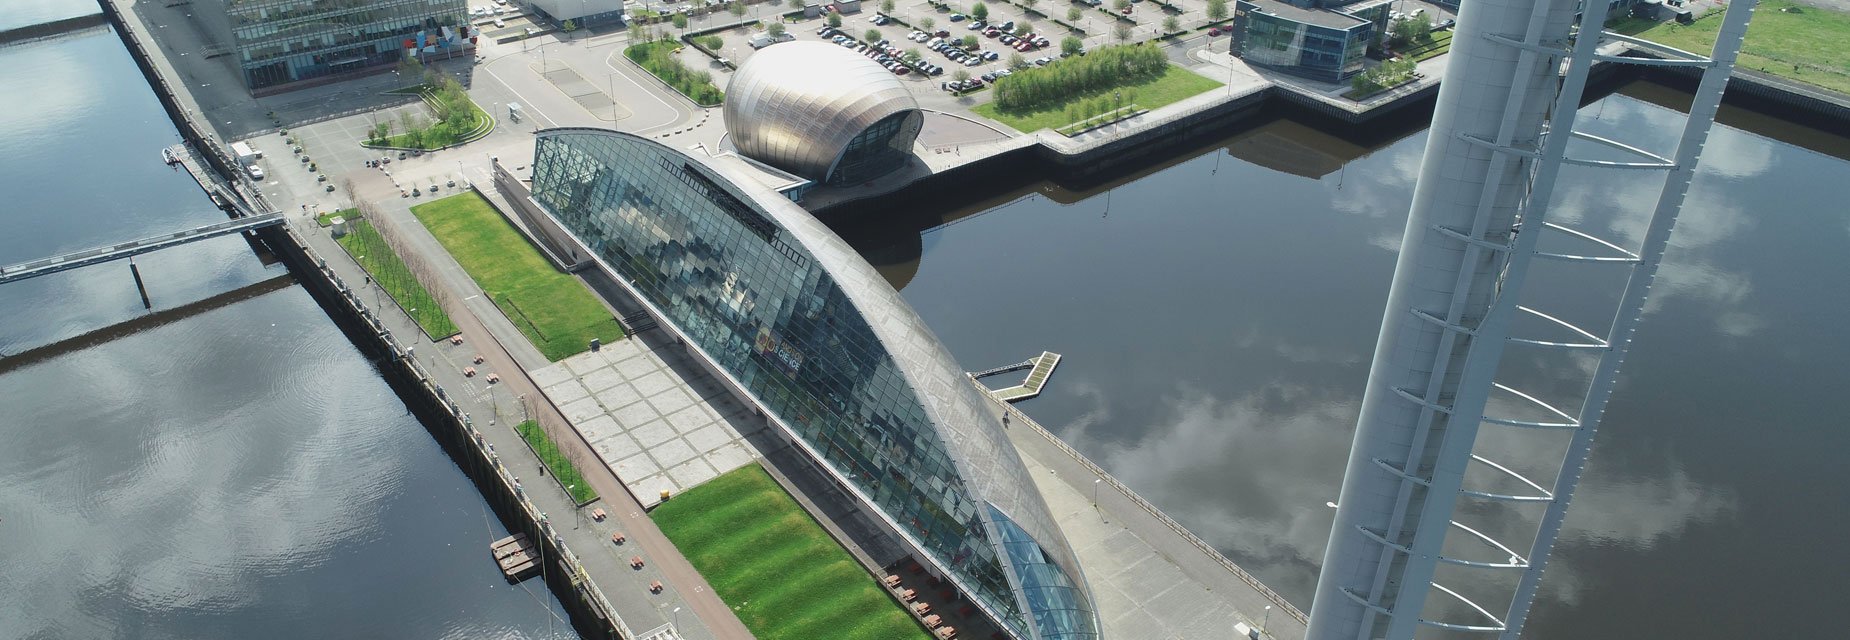 Aerial view of Glasgow Science Centre, Glasgow Tower and Glasgow IMAX